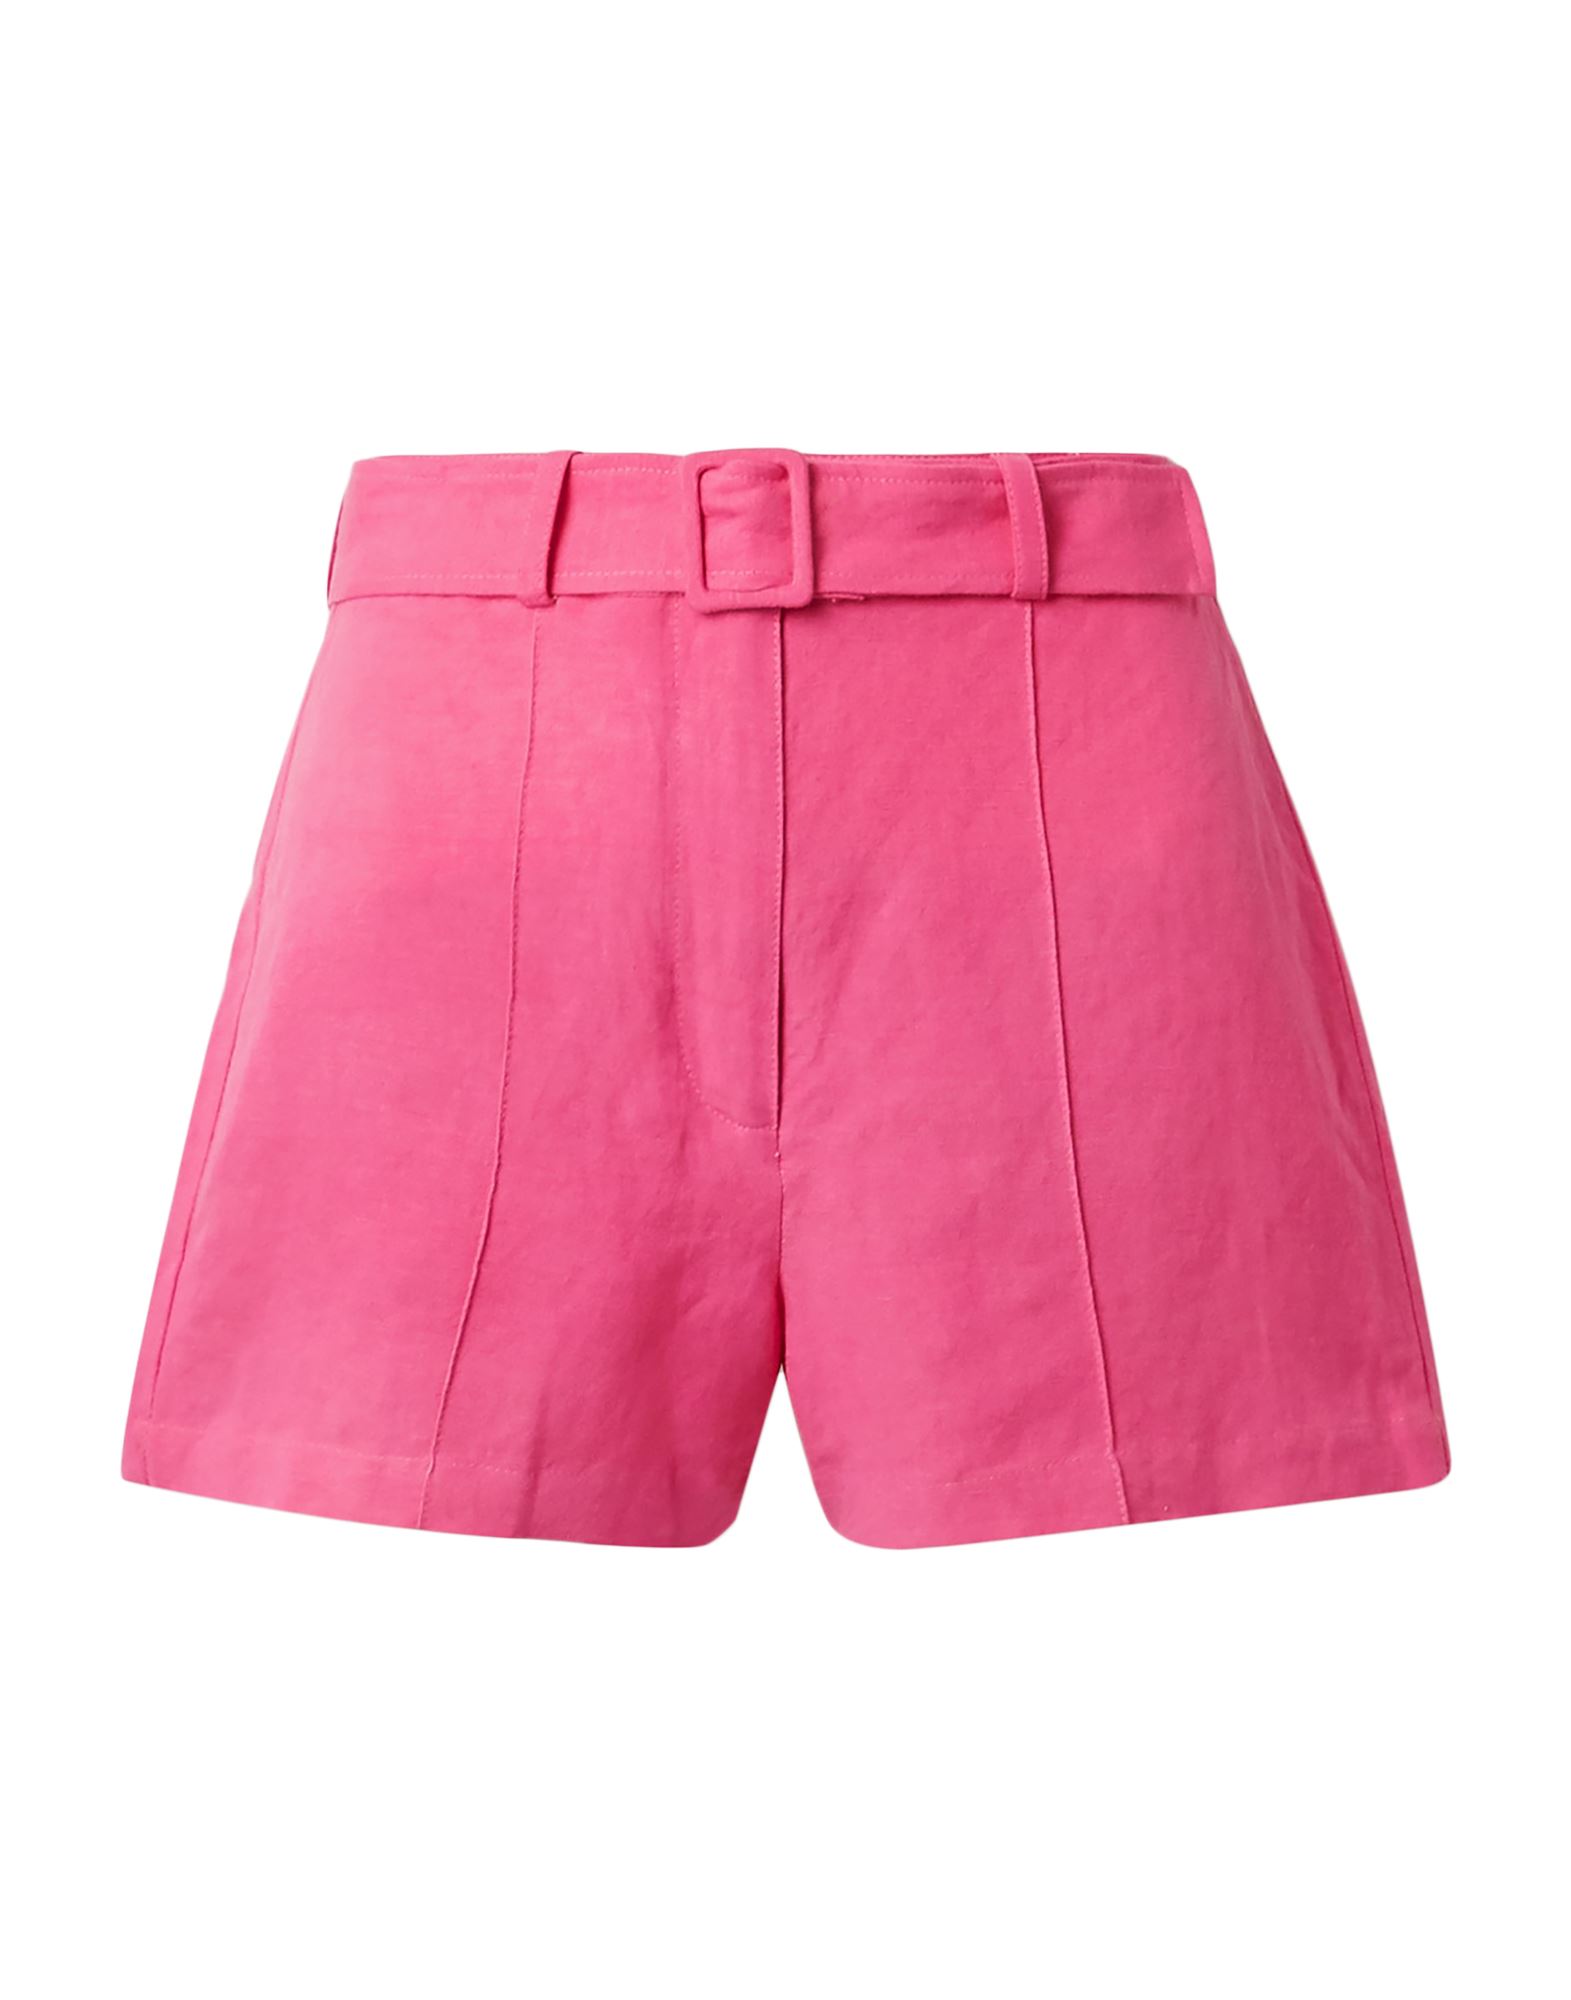 SOLID & STRIPED Shorts - Item 13542882